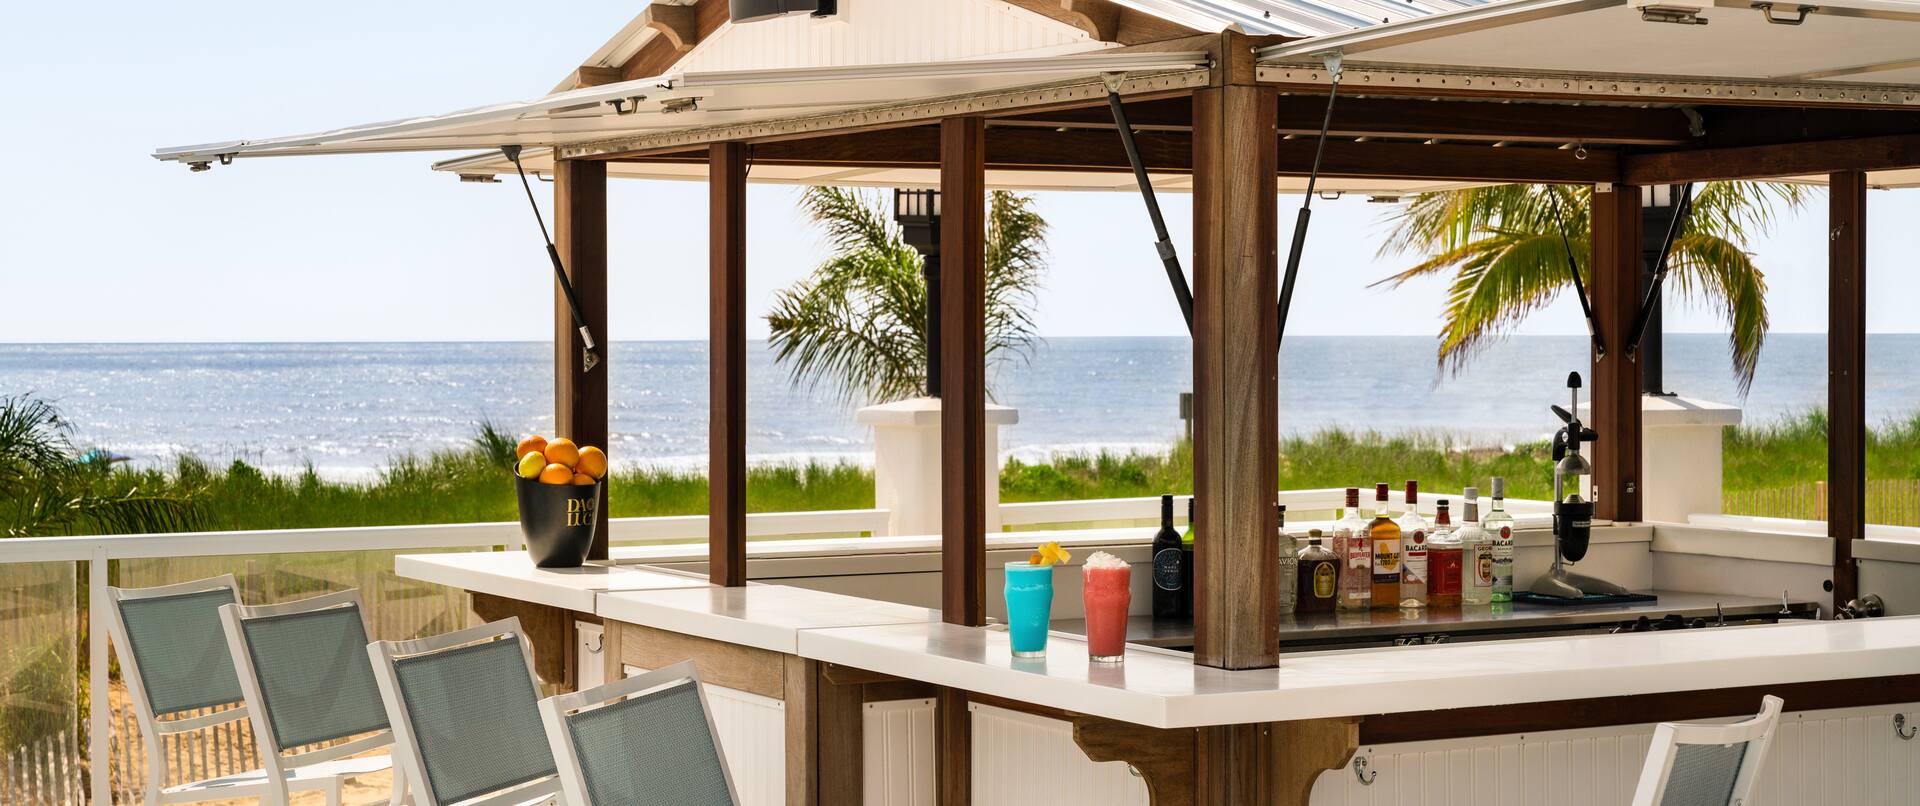 Outdoor cocktail bar by the beach